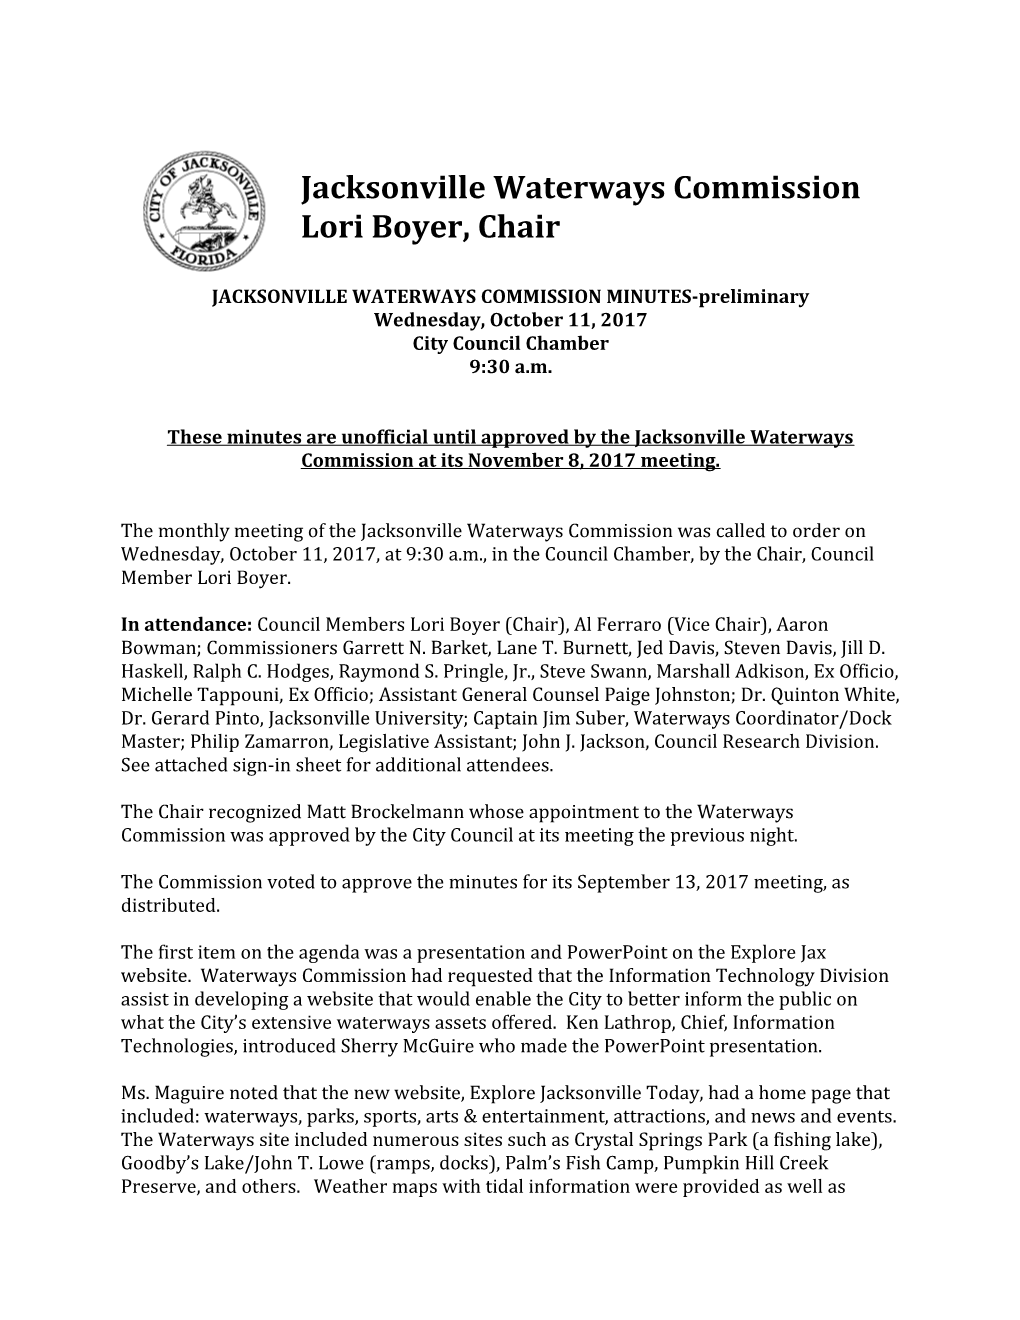 JACKSONVILLE WATERWAYS COMMISSION MINUTES-Preliminary